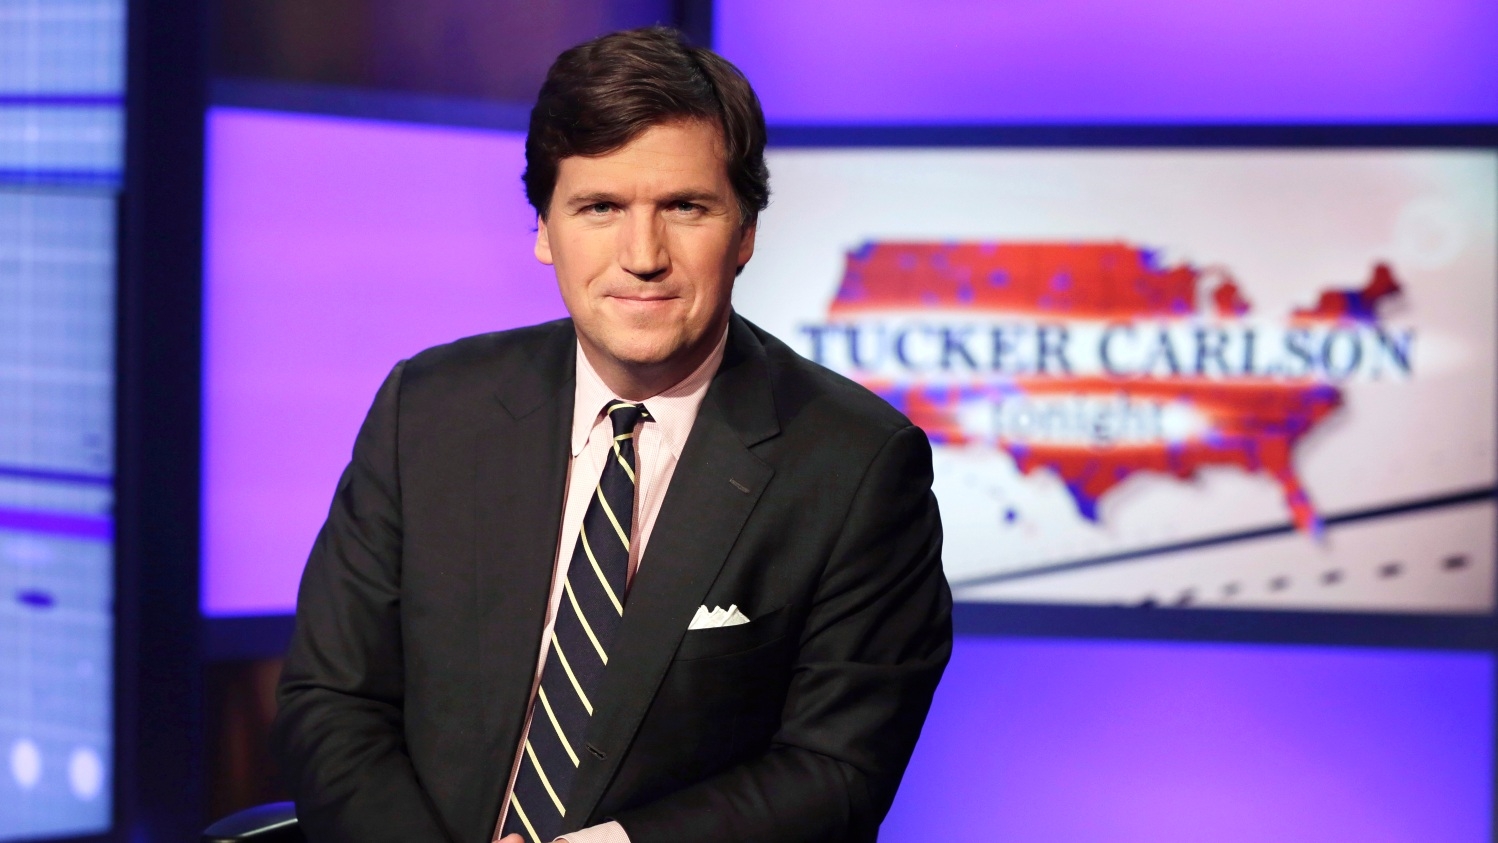 Tucker Carlson, former host of Fox's "Tucker Carlson Tonight," poses for photos in a Fox News Channel studio on 2 March 2017.